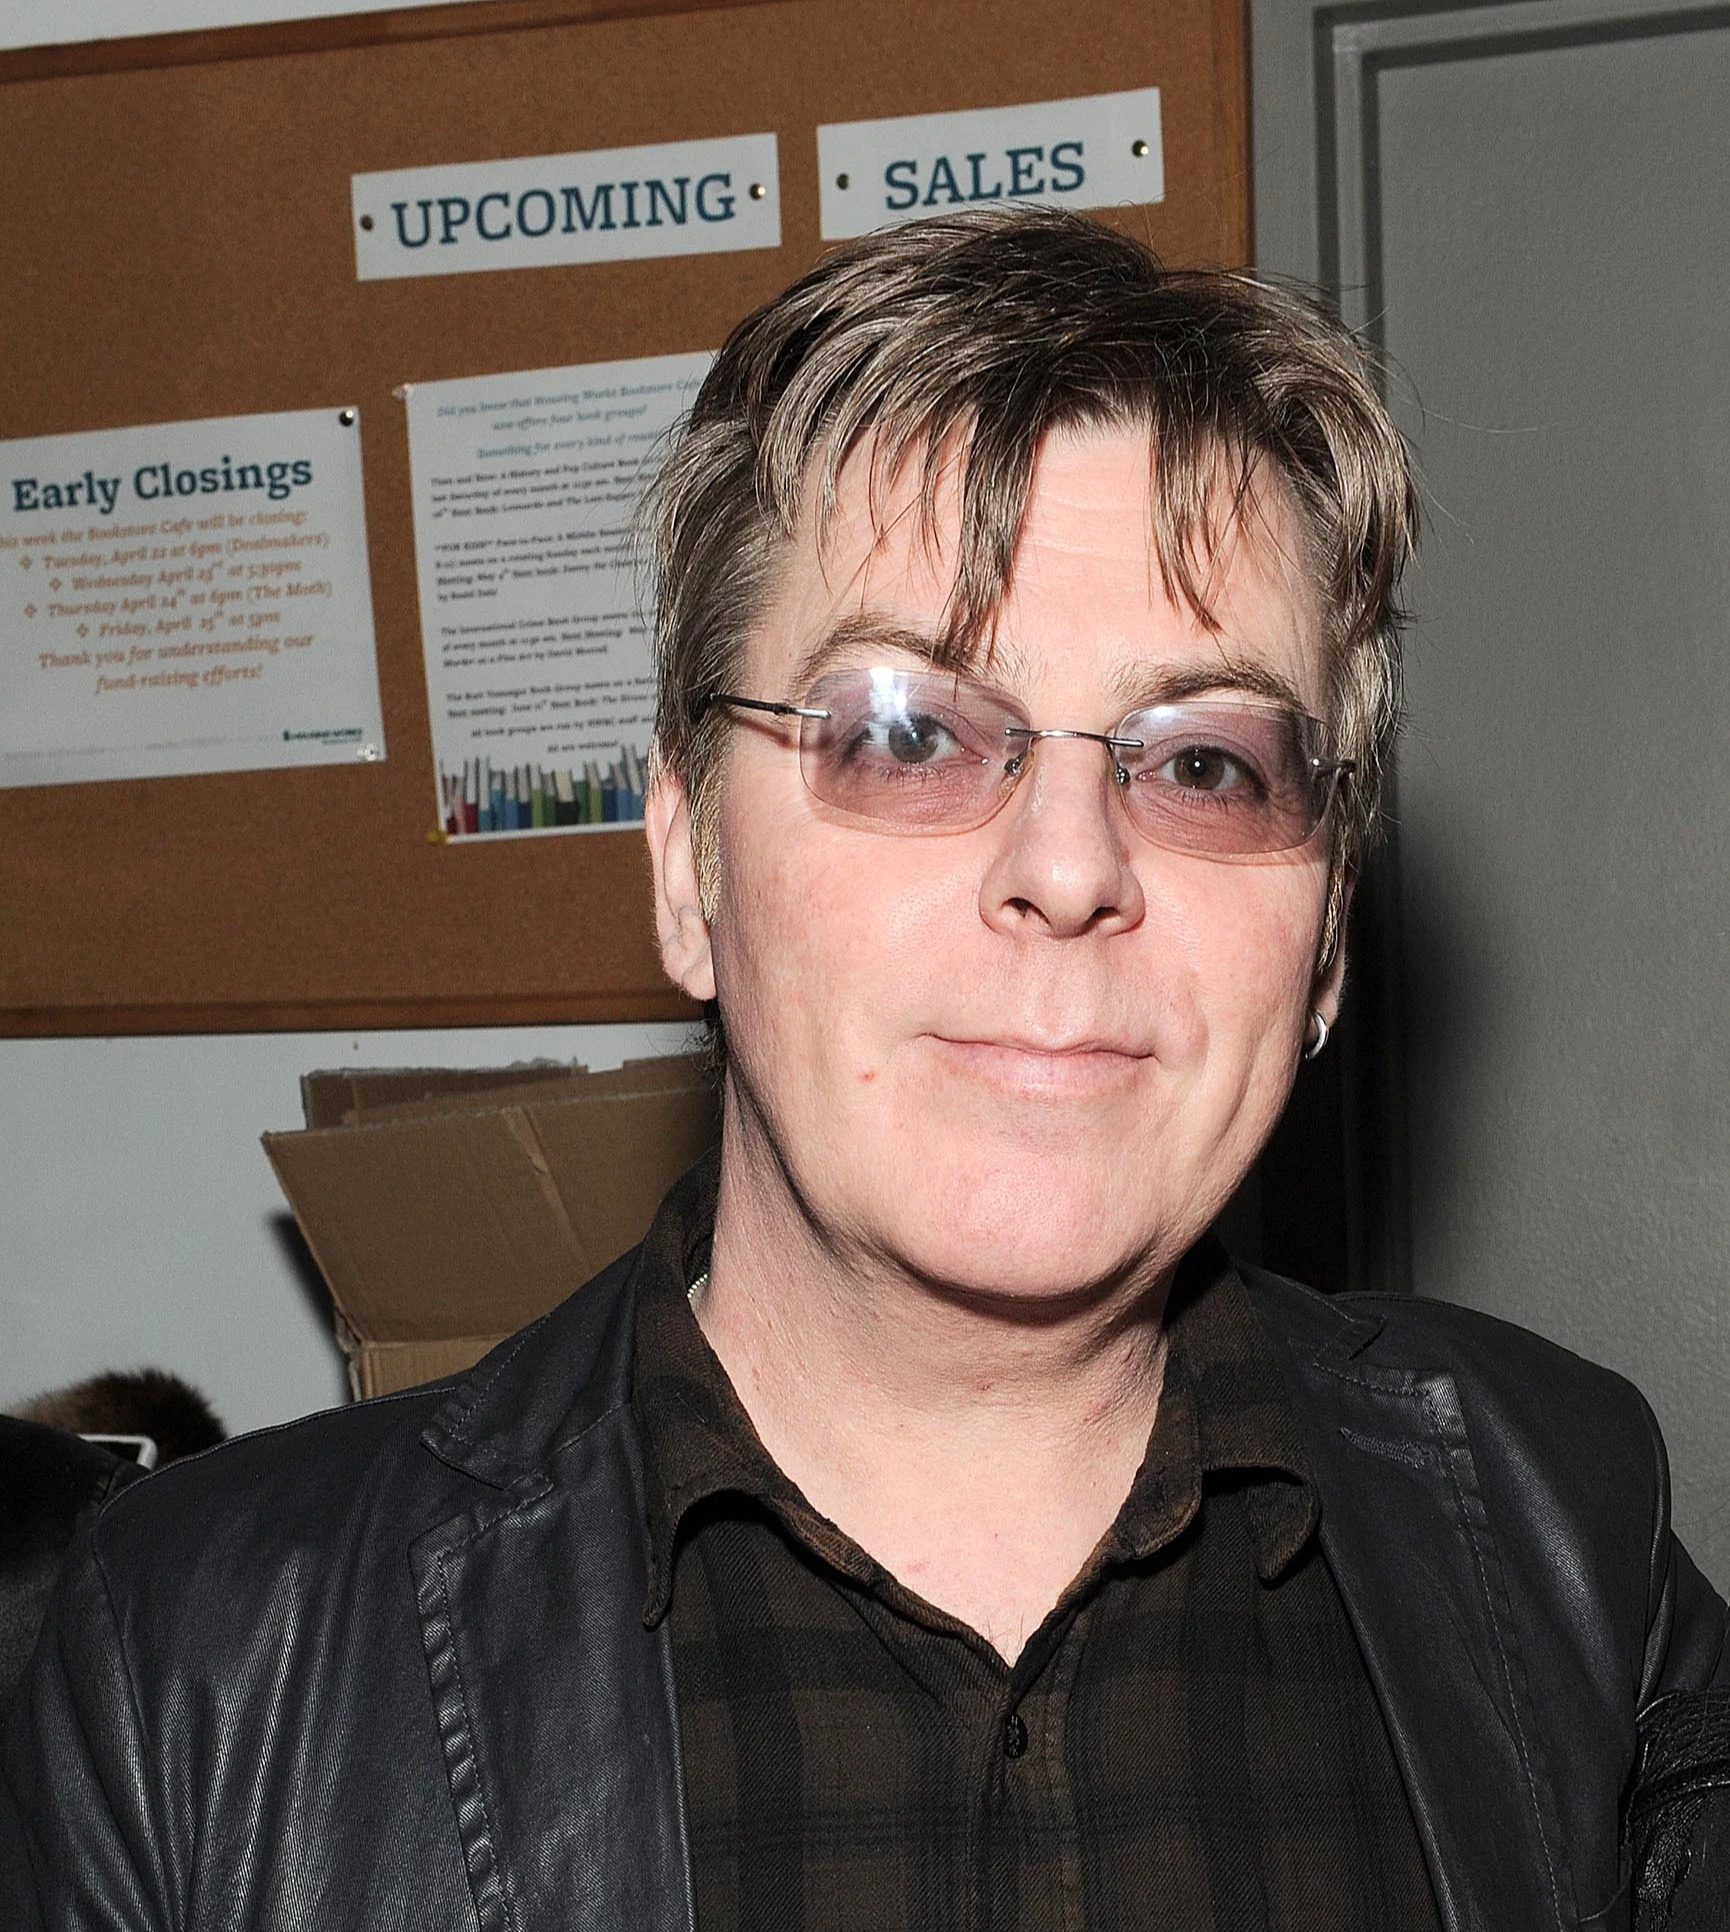 Andy Rourke was the bassist for the legendary rock band The Smiths